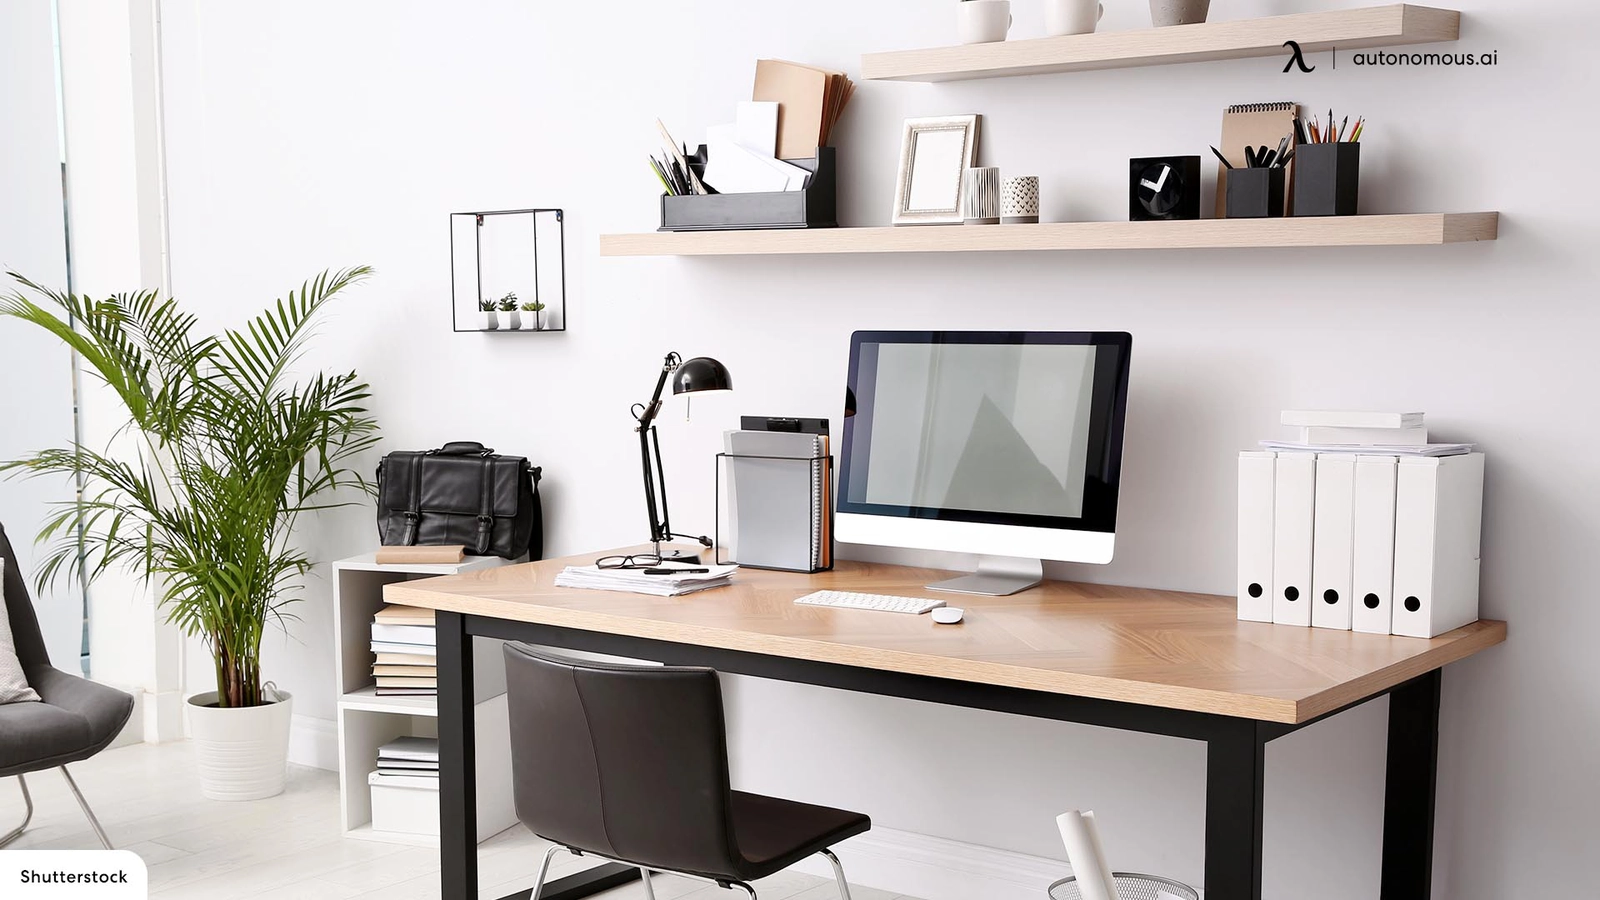 How to Decorate a Desk: Ideas to Add Personality to your Workspace